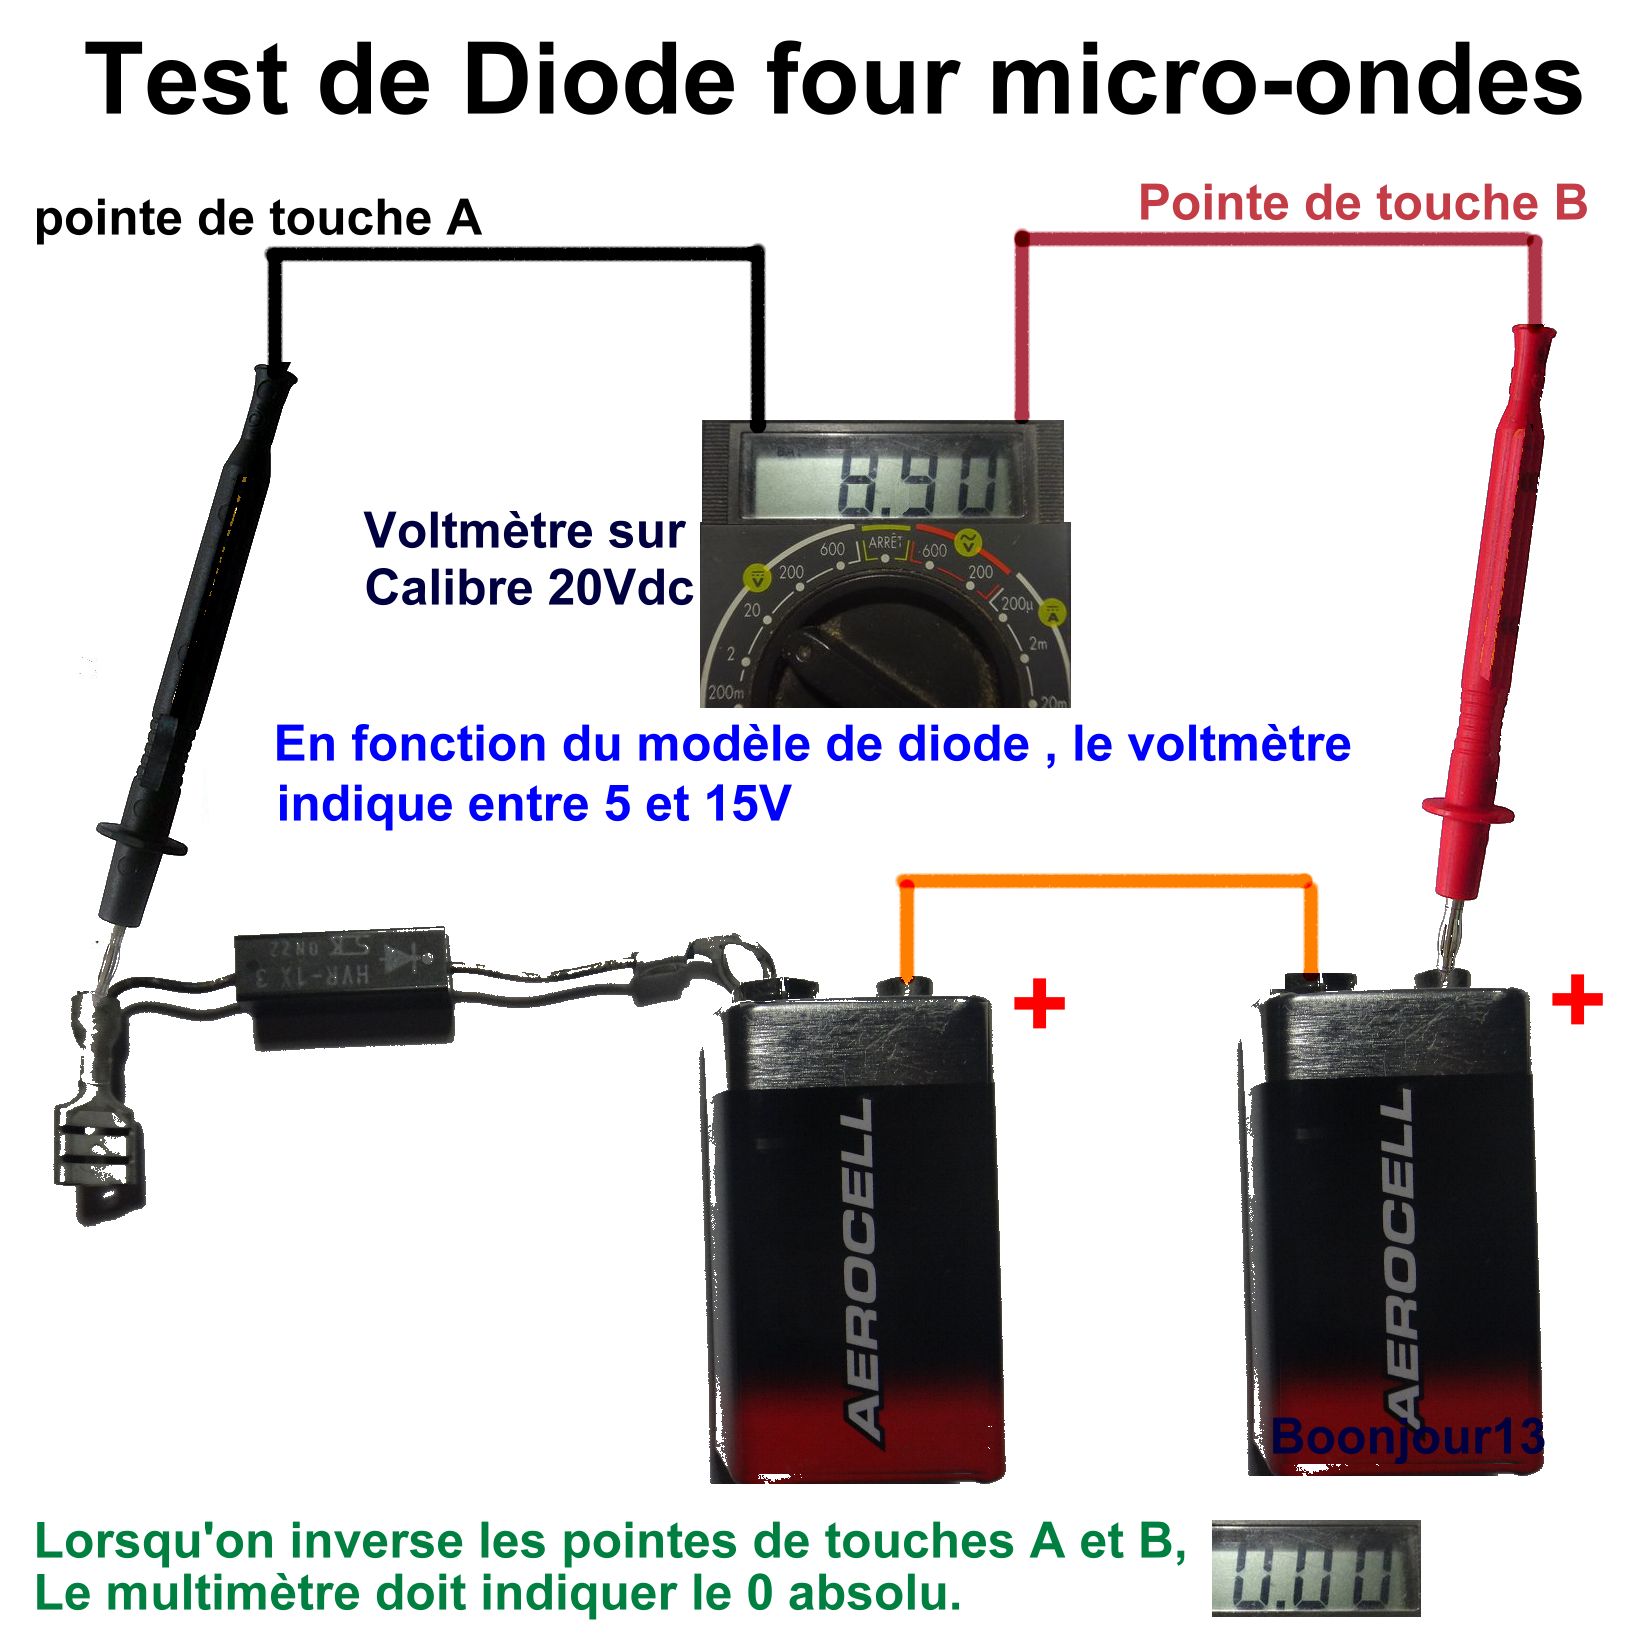 Nom : Test Diodes Four Micro ondes.jpg
Affichages : 280
Taille : 253,2 Ko